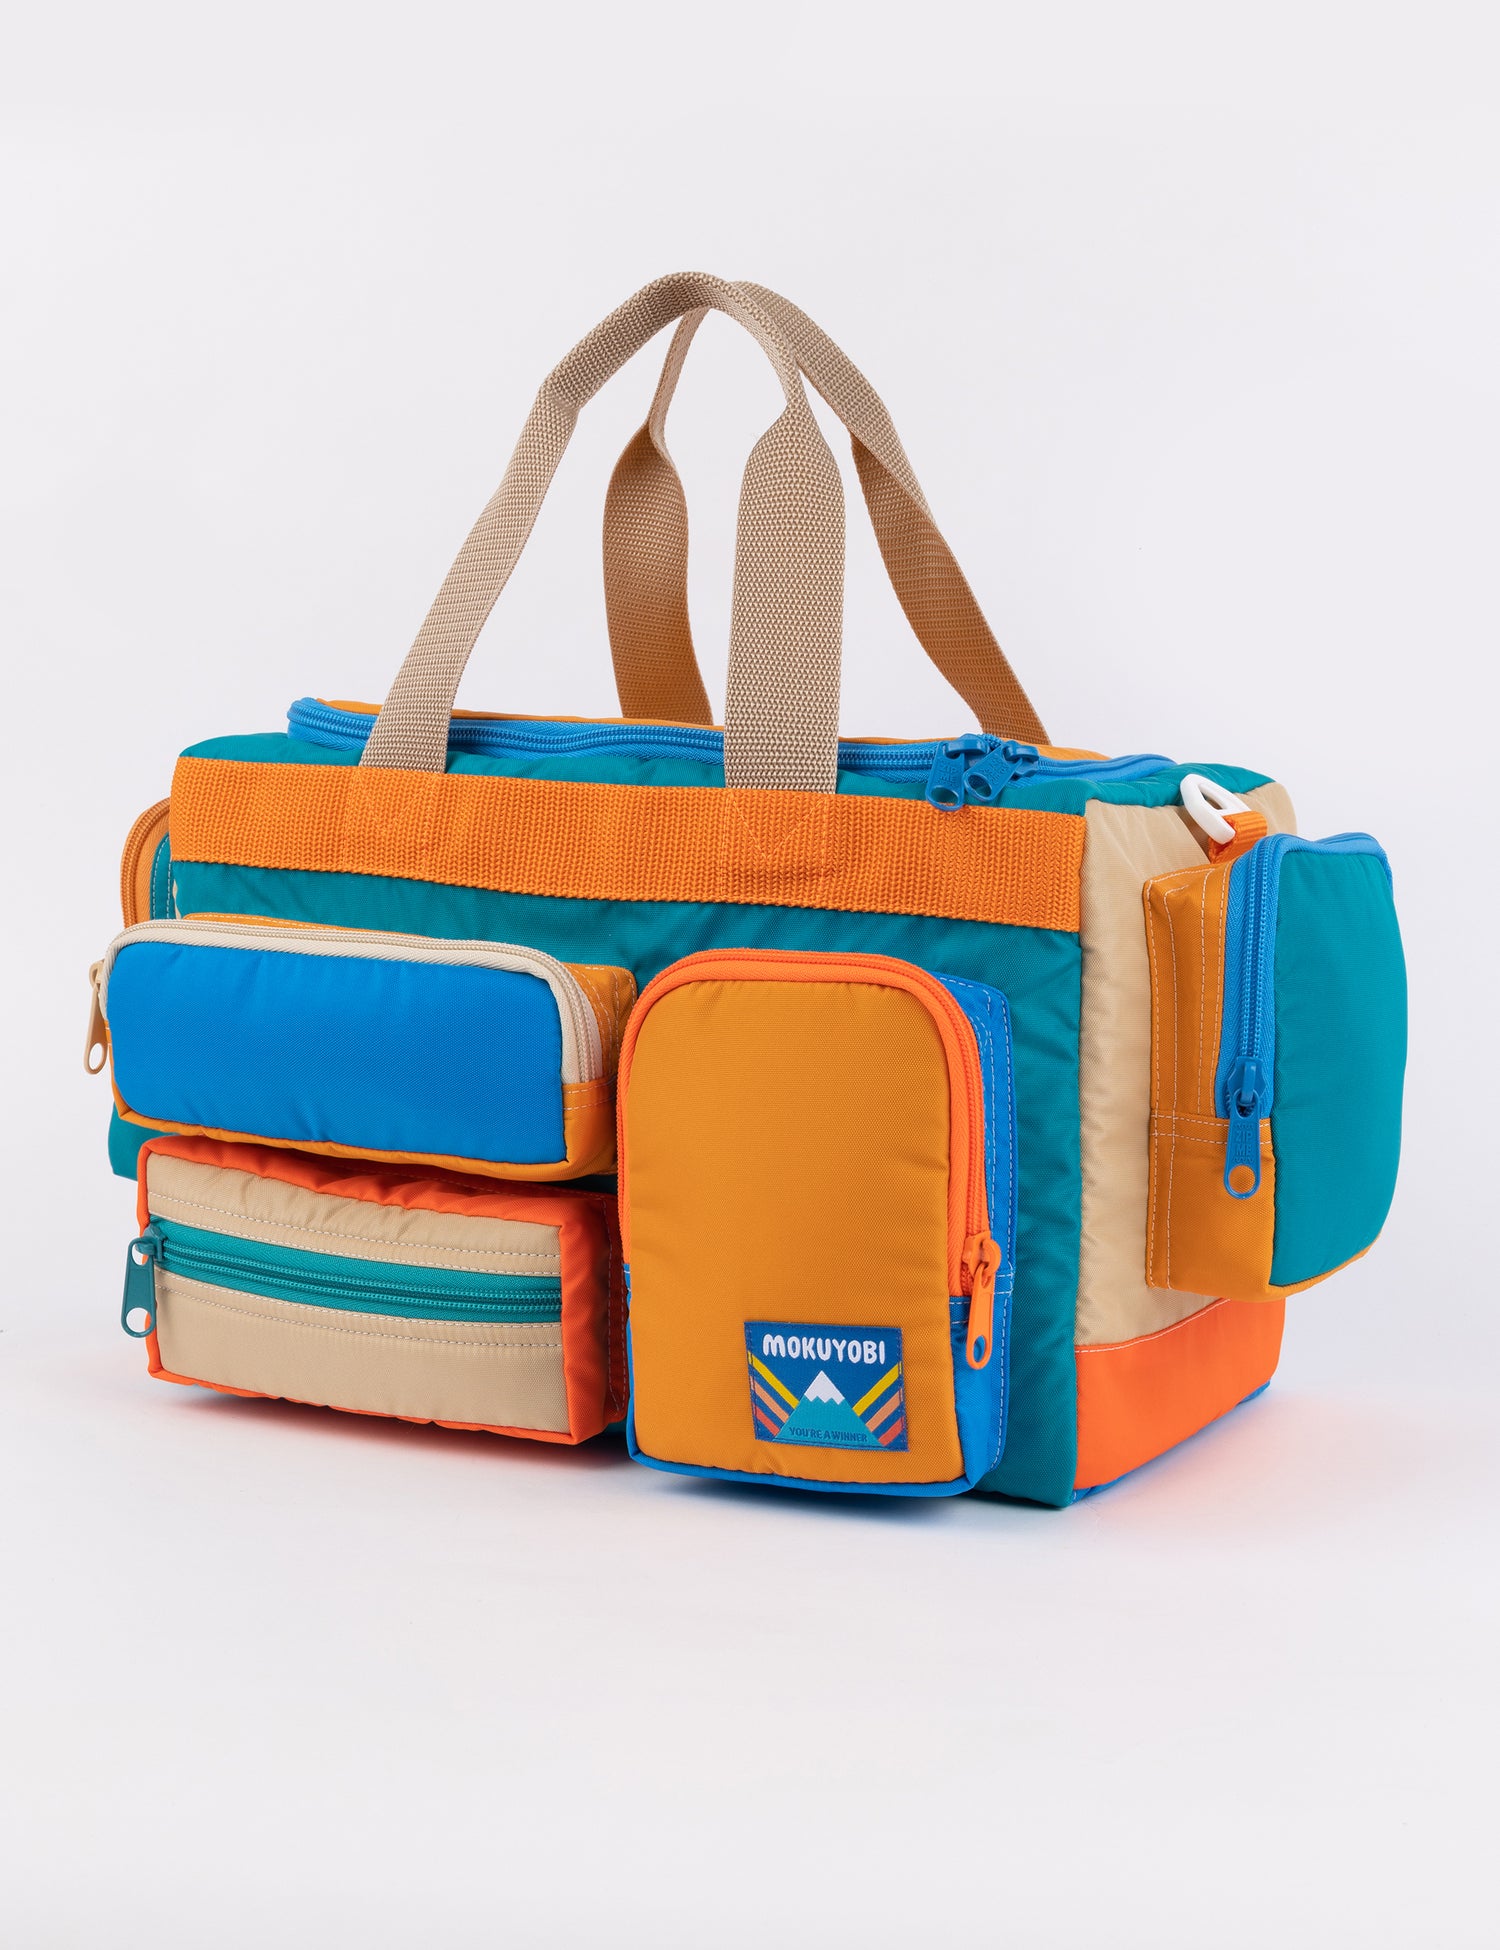 camp bag with multiple pockets and straps in multiple colors